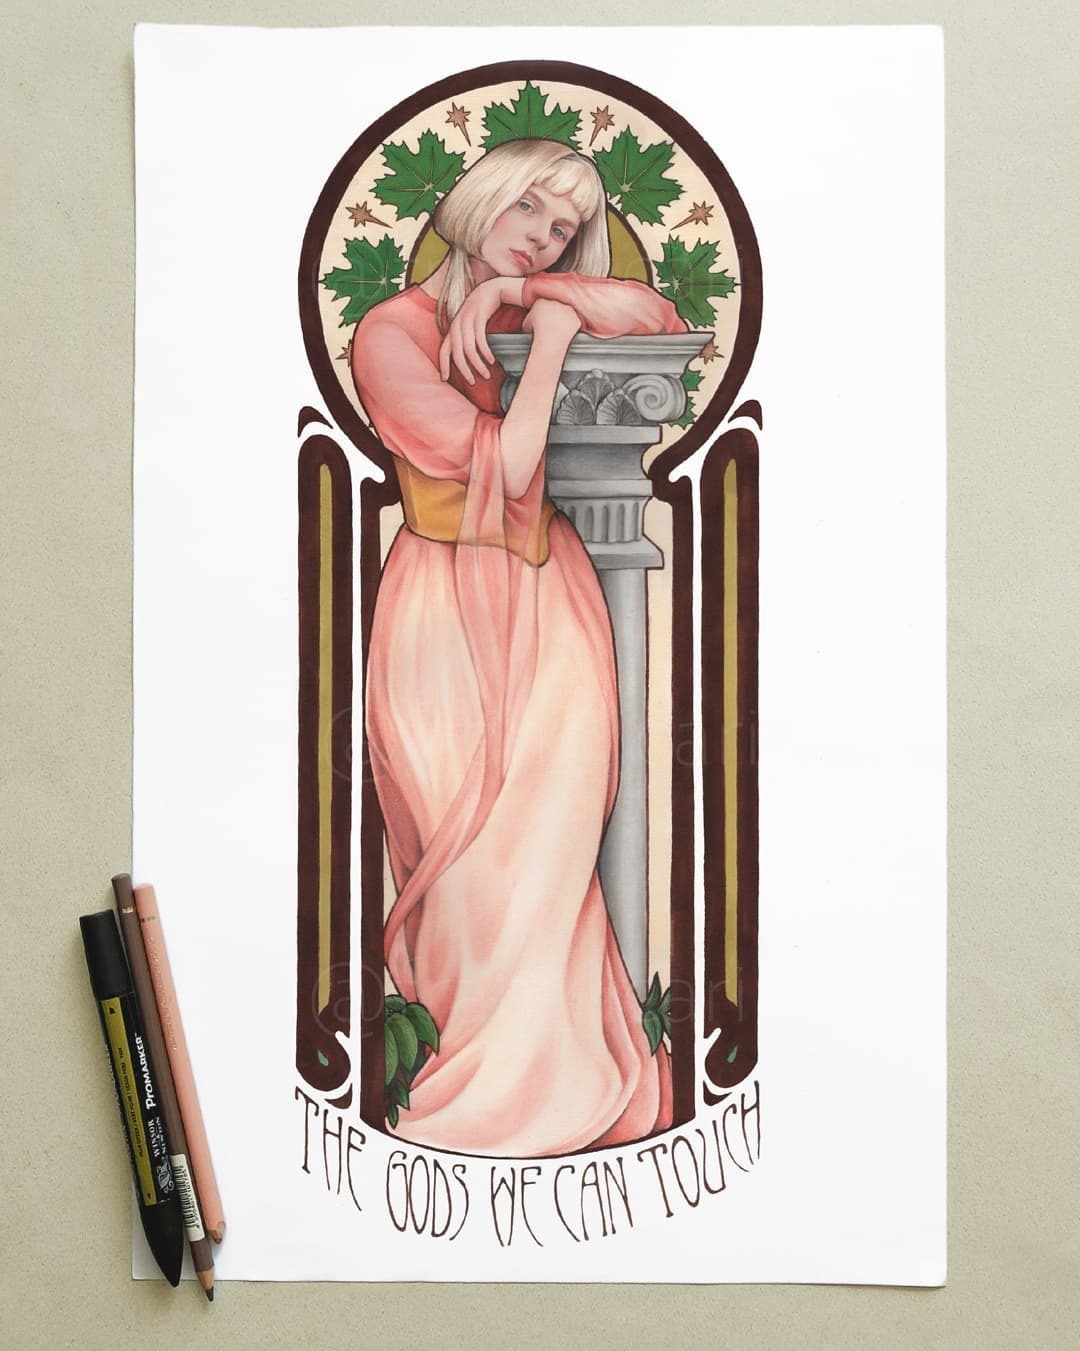 An amazing The Gods We Can Touch illustration inspired by Art Nouveau style, shared and created by Fran Licari  ❤️❤️❤️ |...